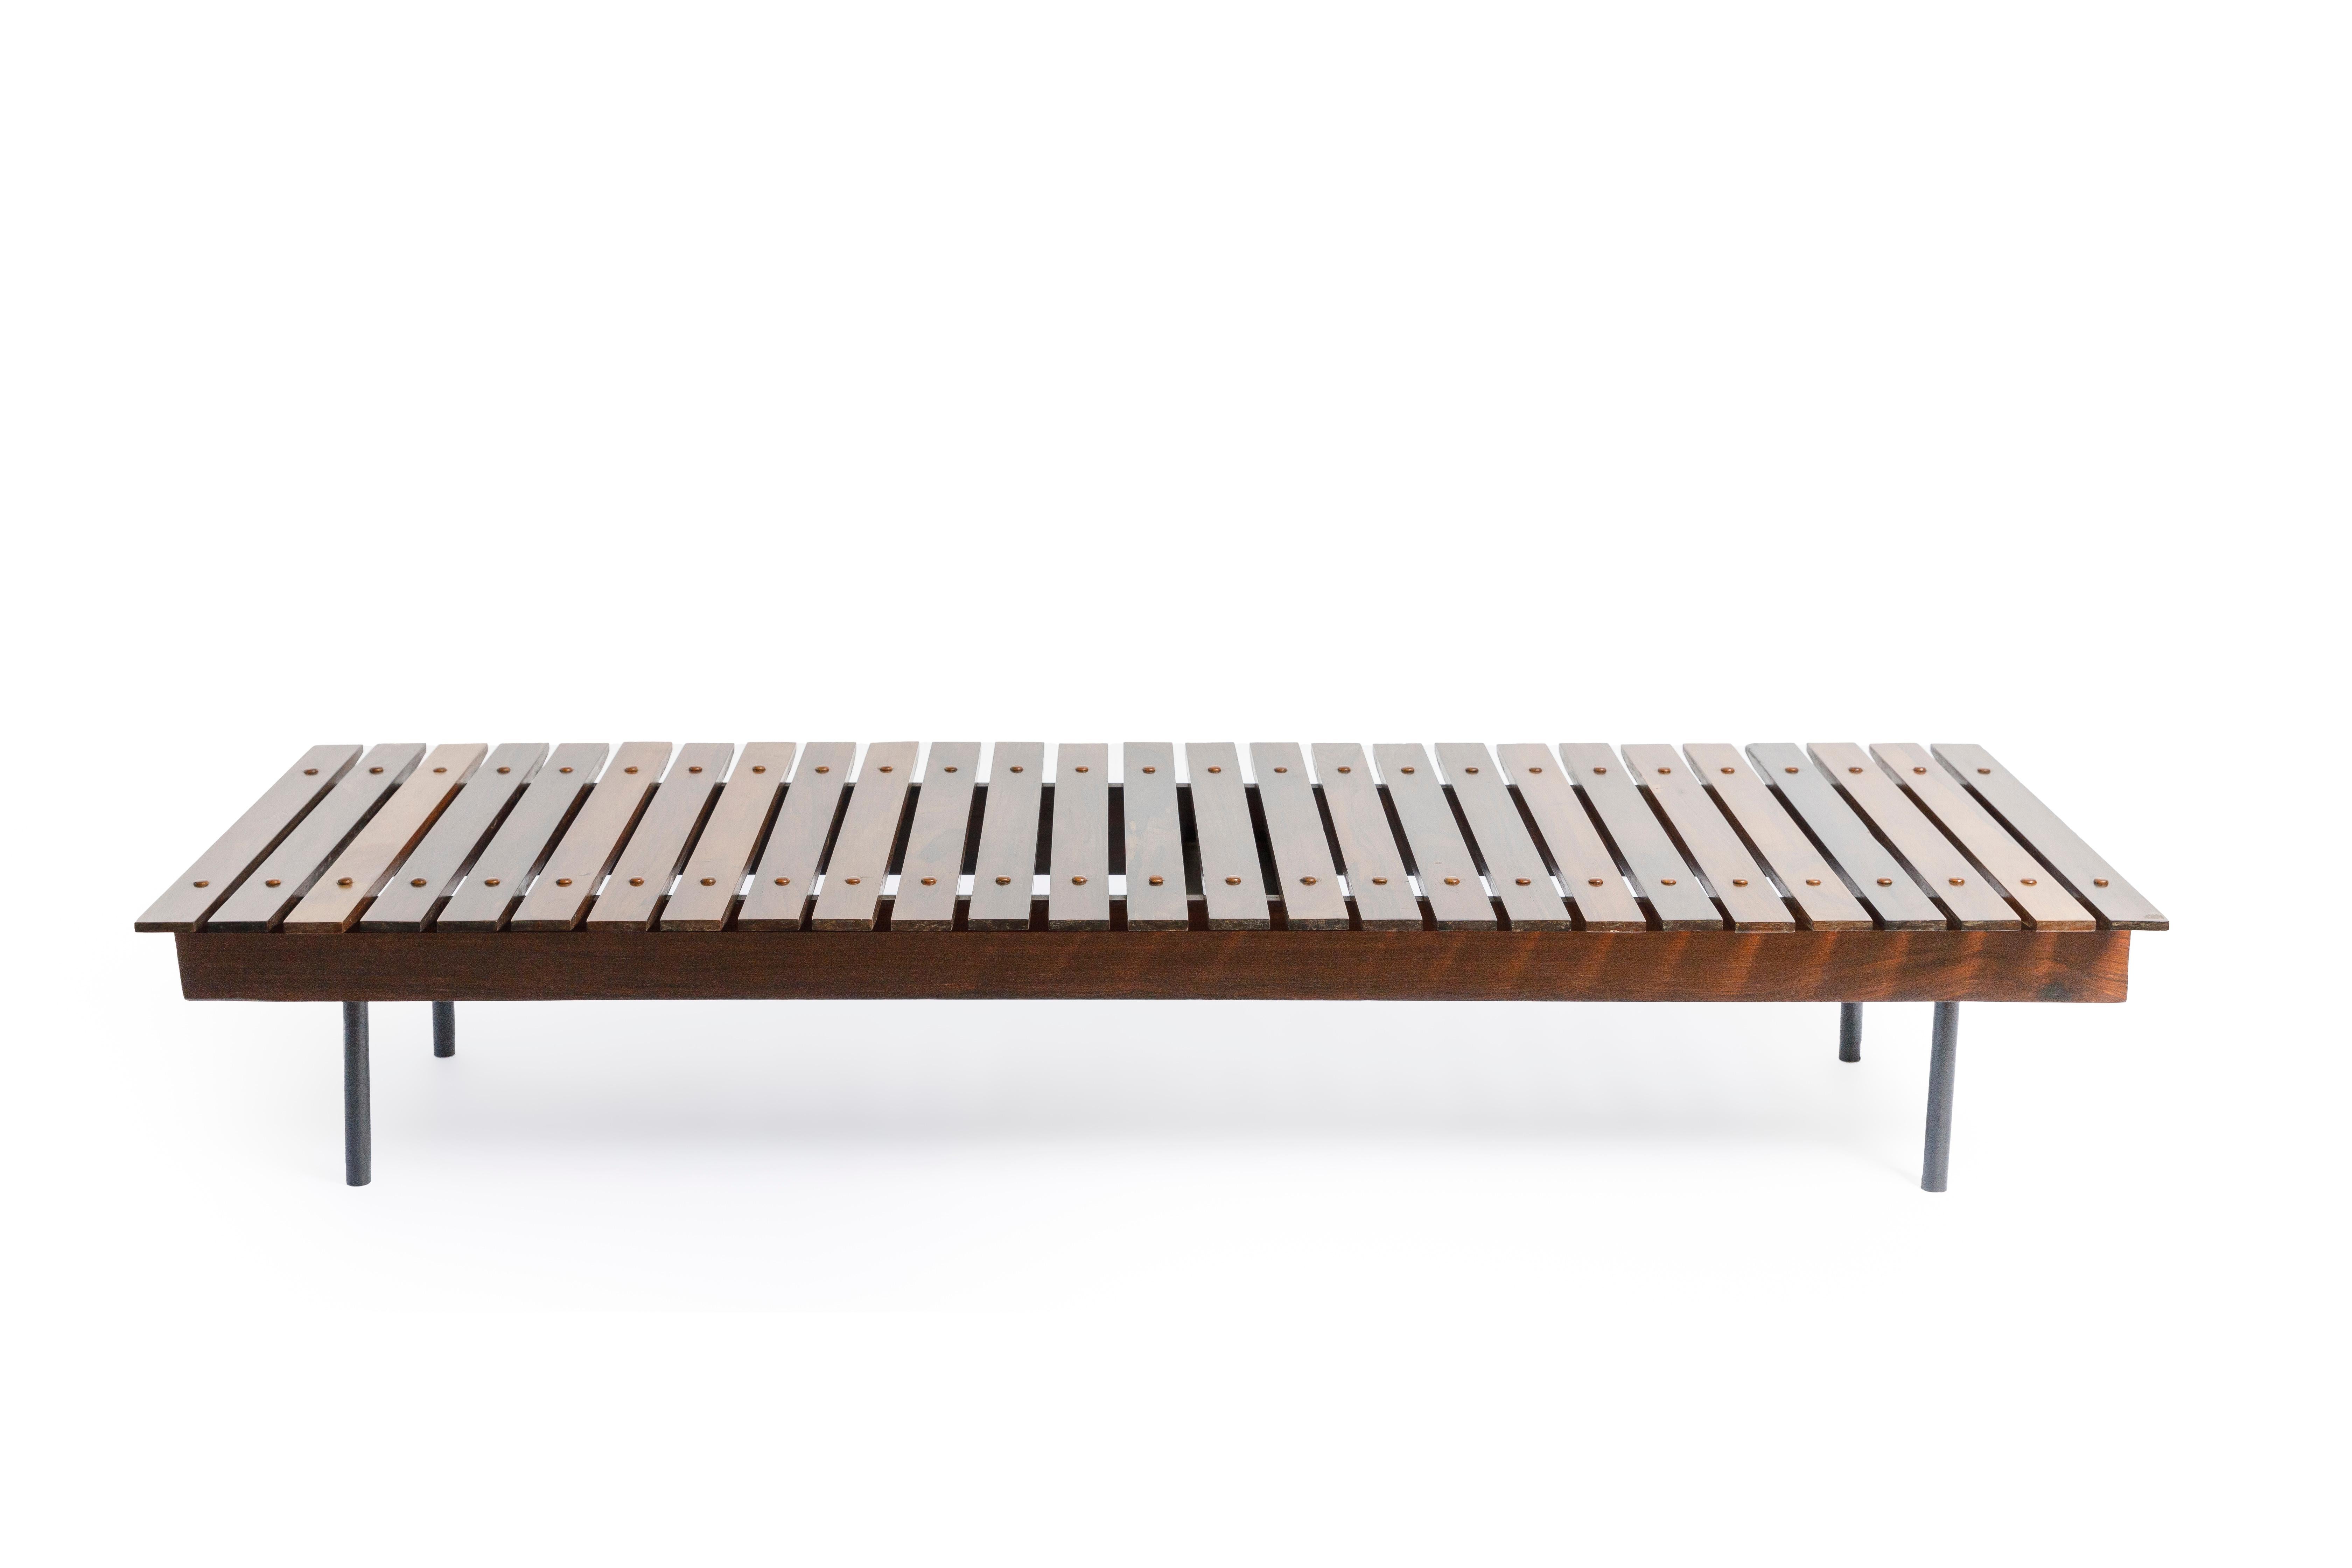 Slatted bench produced in Brazil in the 1950s by OCA manufacture. This beautiful piece's seating is composed of regularly arranged solid Brazilian hardwood slats, finished with natural varnish maintaining the wood's character, over four feet in